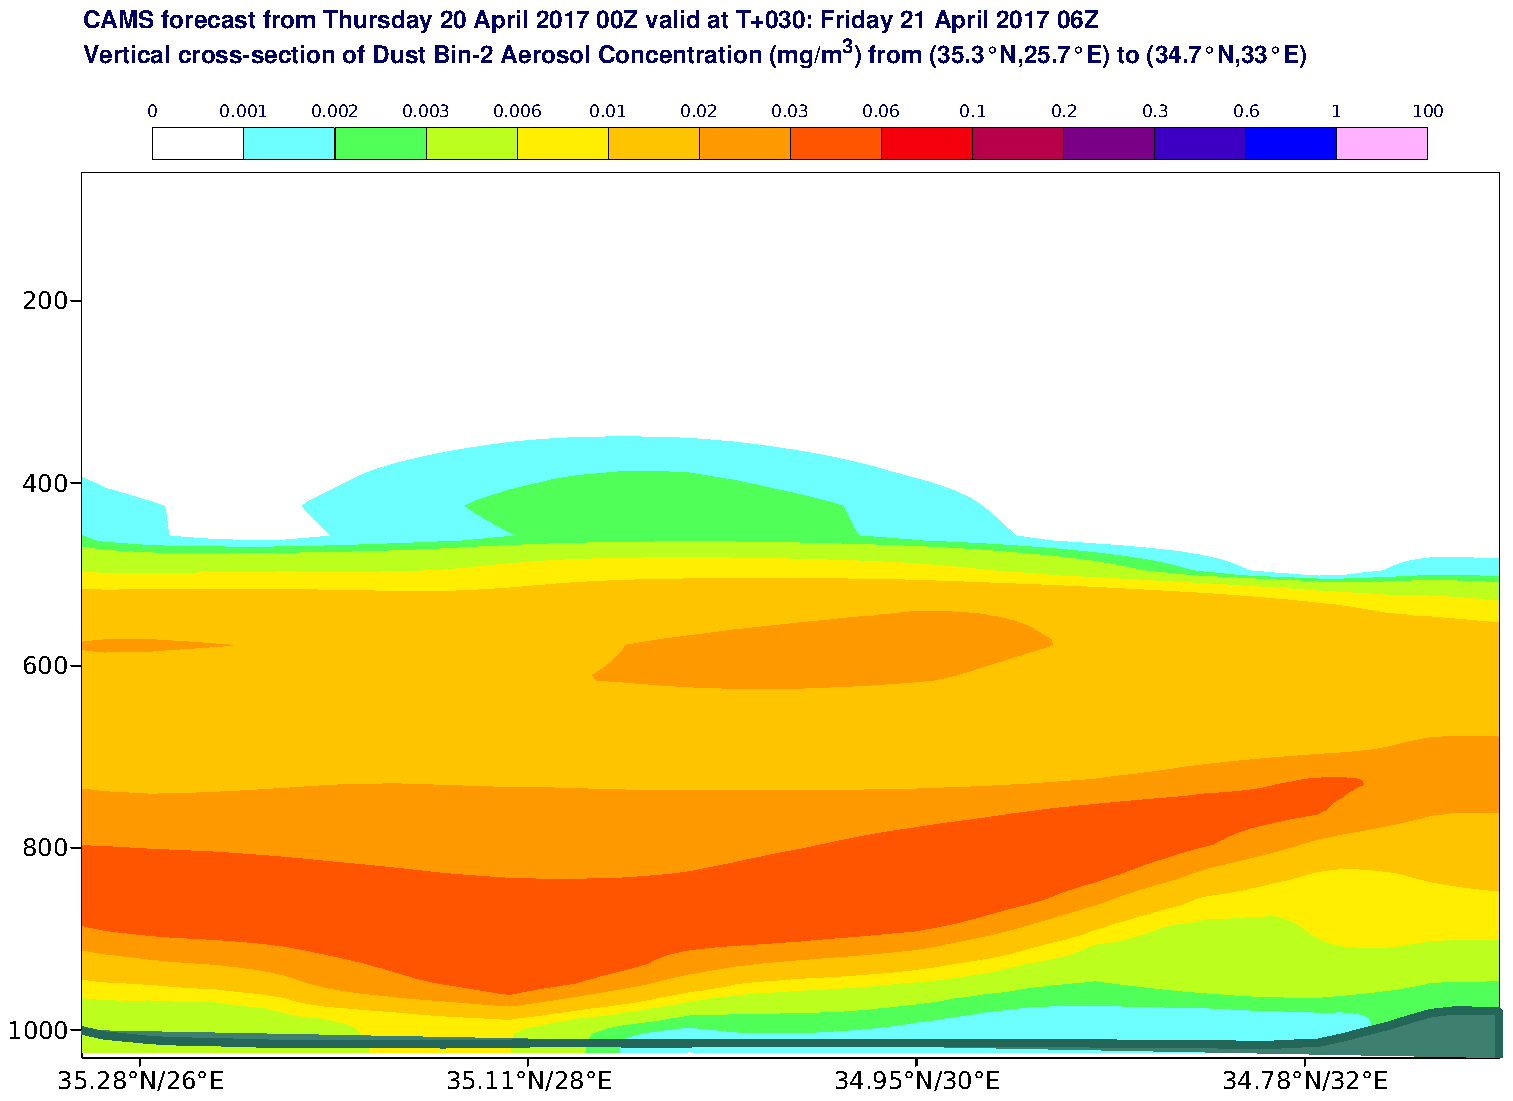 Vertical cross-section of Dust Bin-2 Aerosol Concentration (mg/m3) valid at T30 - 2017-04-21 06:00